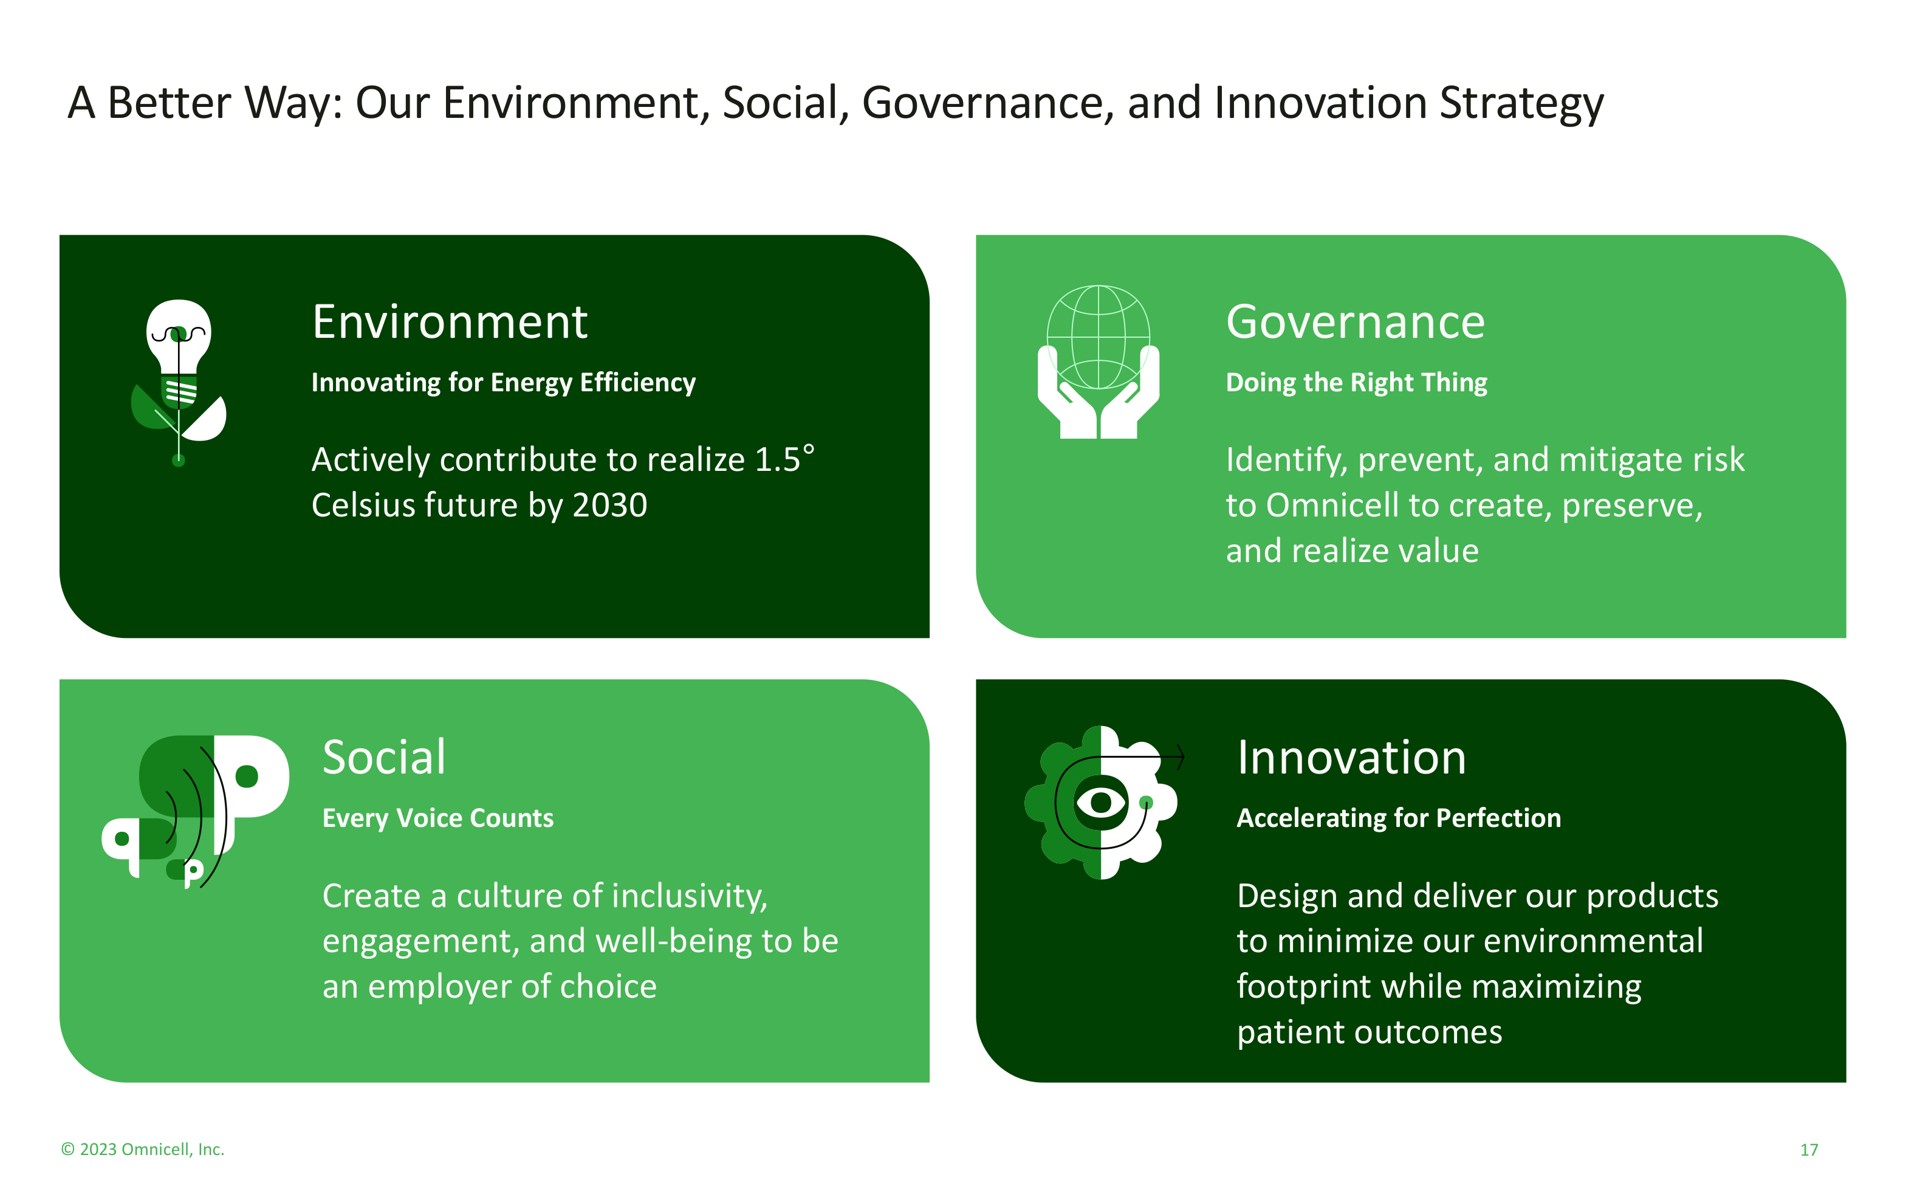 a better way our environment social governance and innovation strategy environment actively contribute to realize future by social create a culture of engagement and well being to be an employer of choice governance identify prevent and mitigate risk to to create preserve and realize value innovation design and deliver our products to minimize our environmental footprint while maximizing patient outcomes | Omnicell